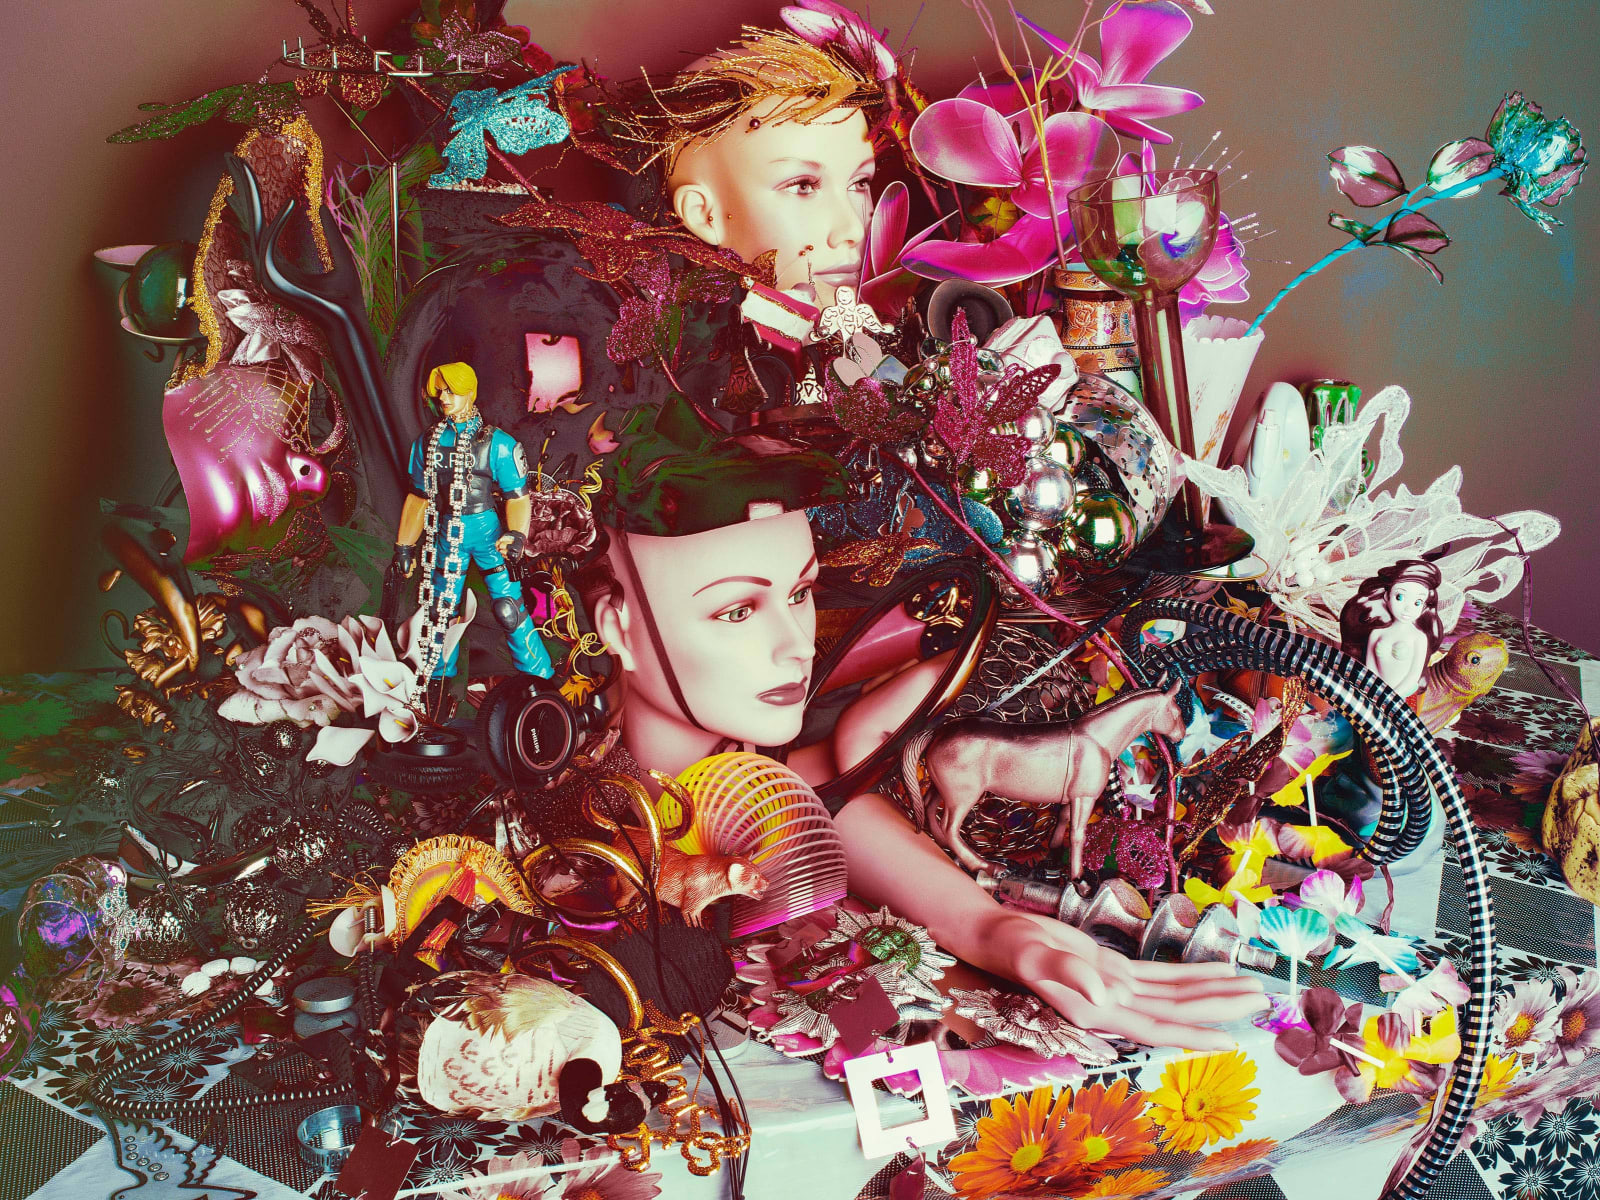 Valerie Belin Still life with mirror, mannequin heads, flowers, and other knick knacks